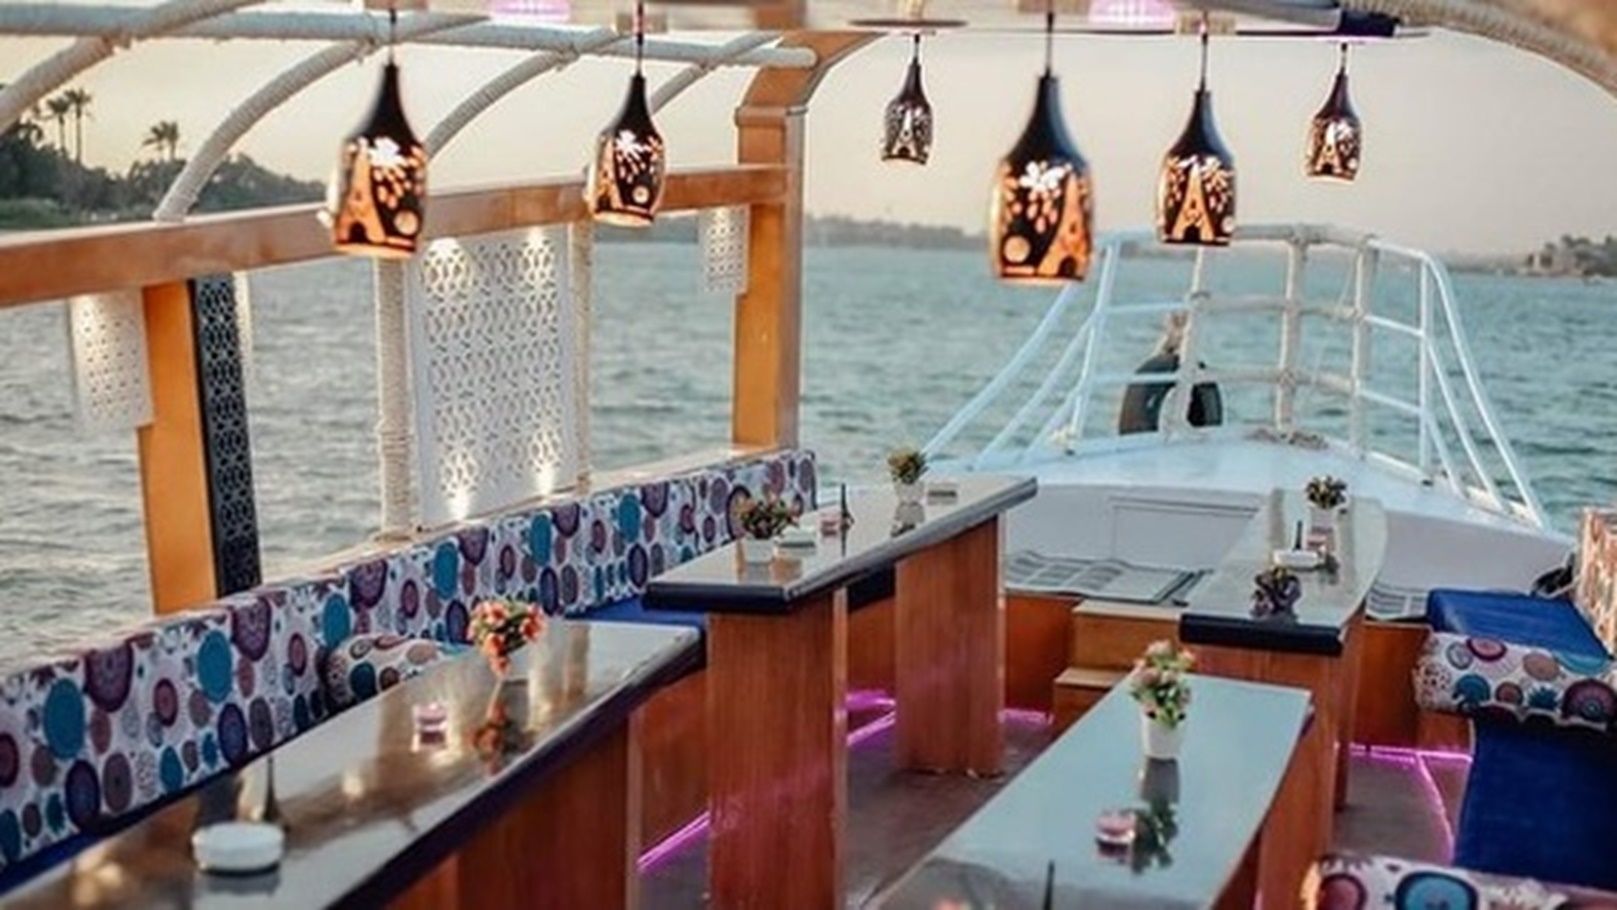 Nile View Boat
